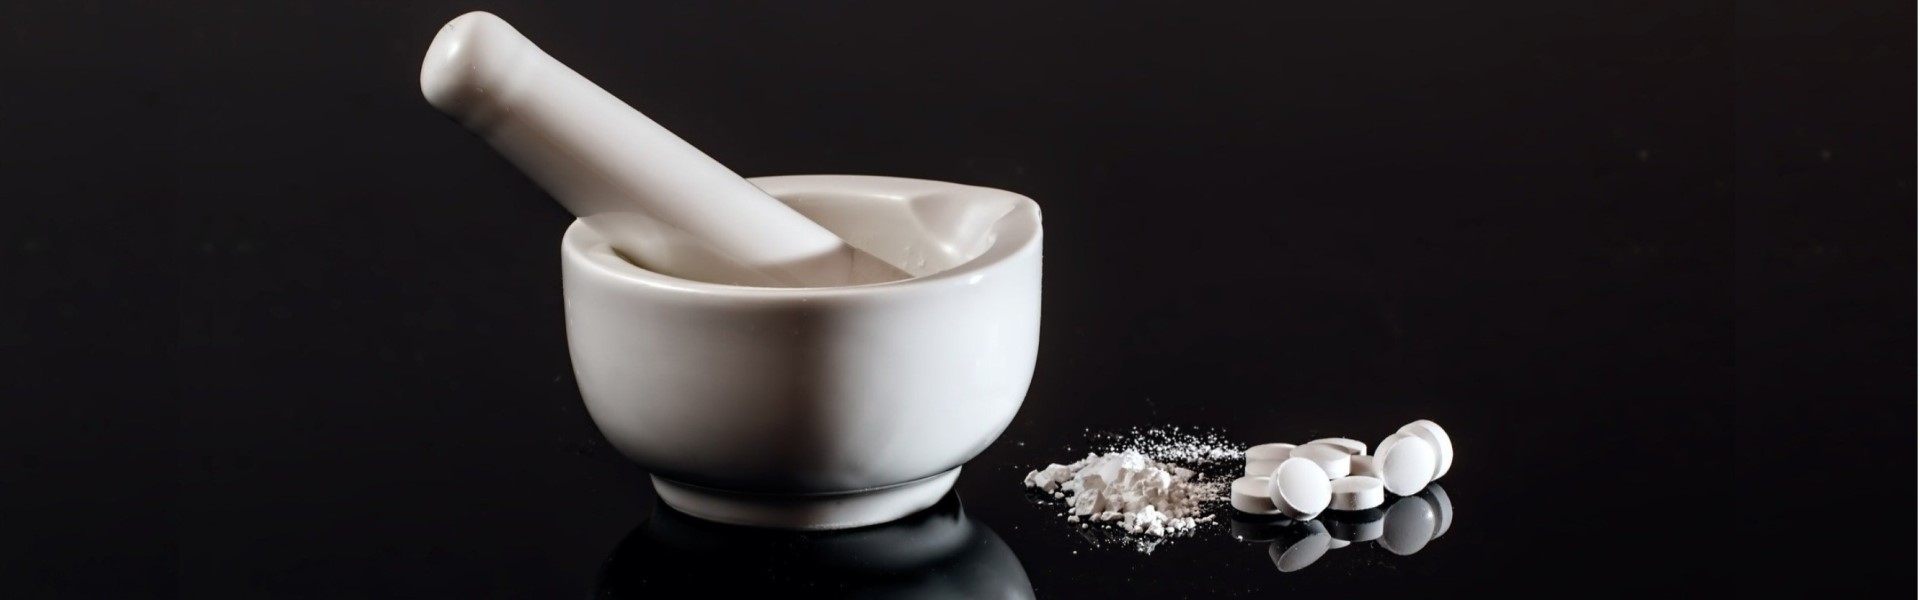 Picture of mortar and pestle with crushed tablets